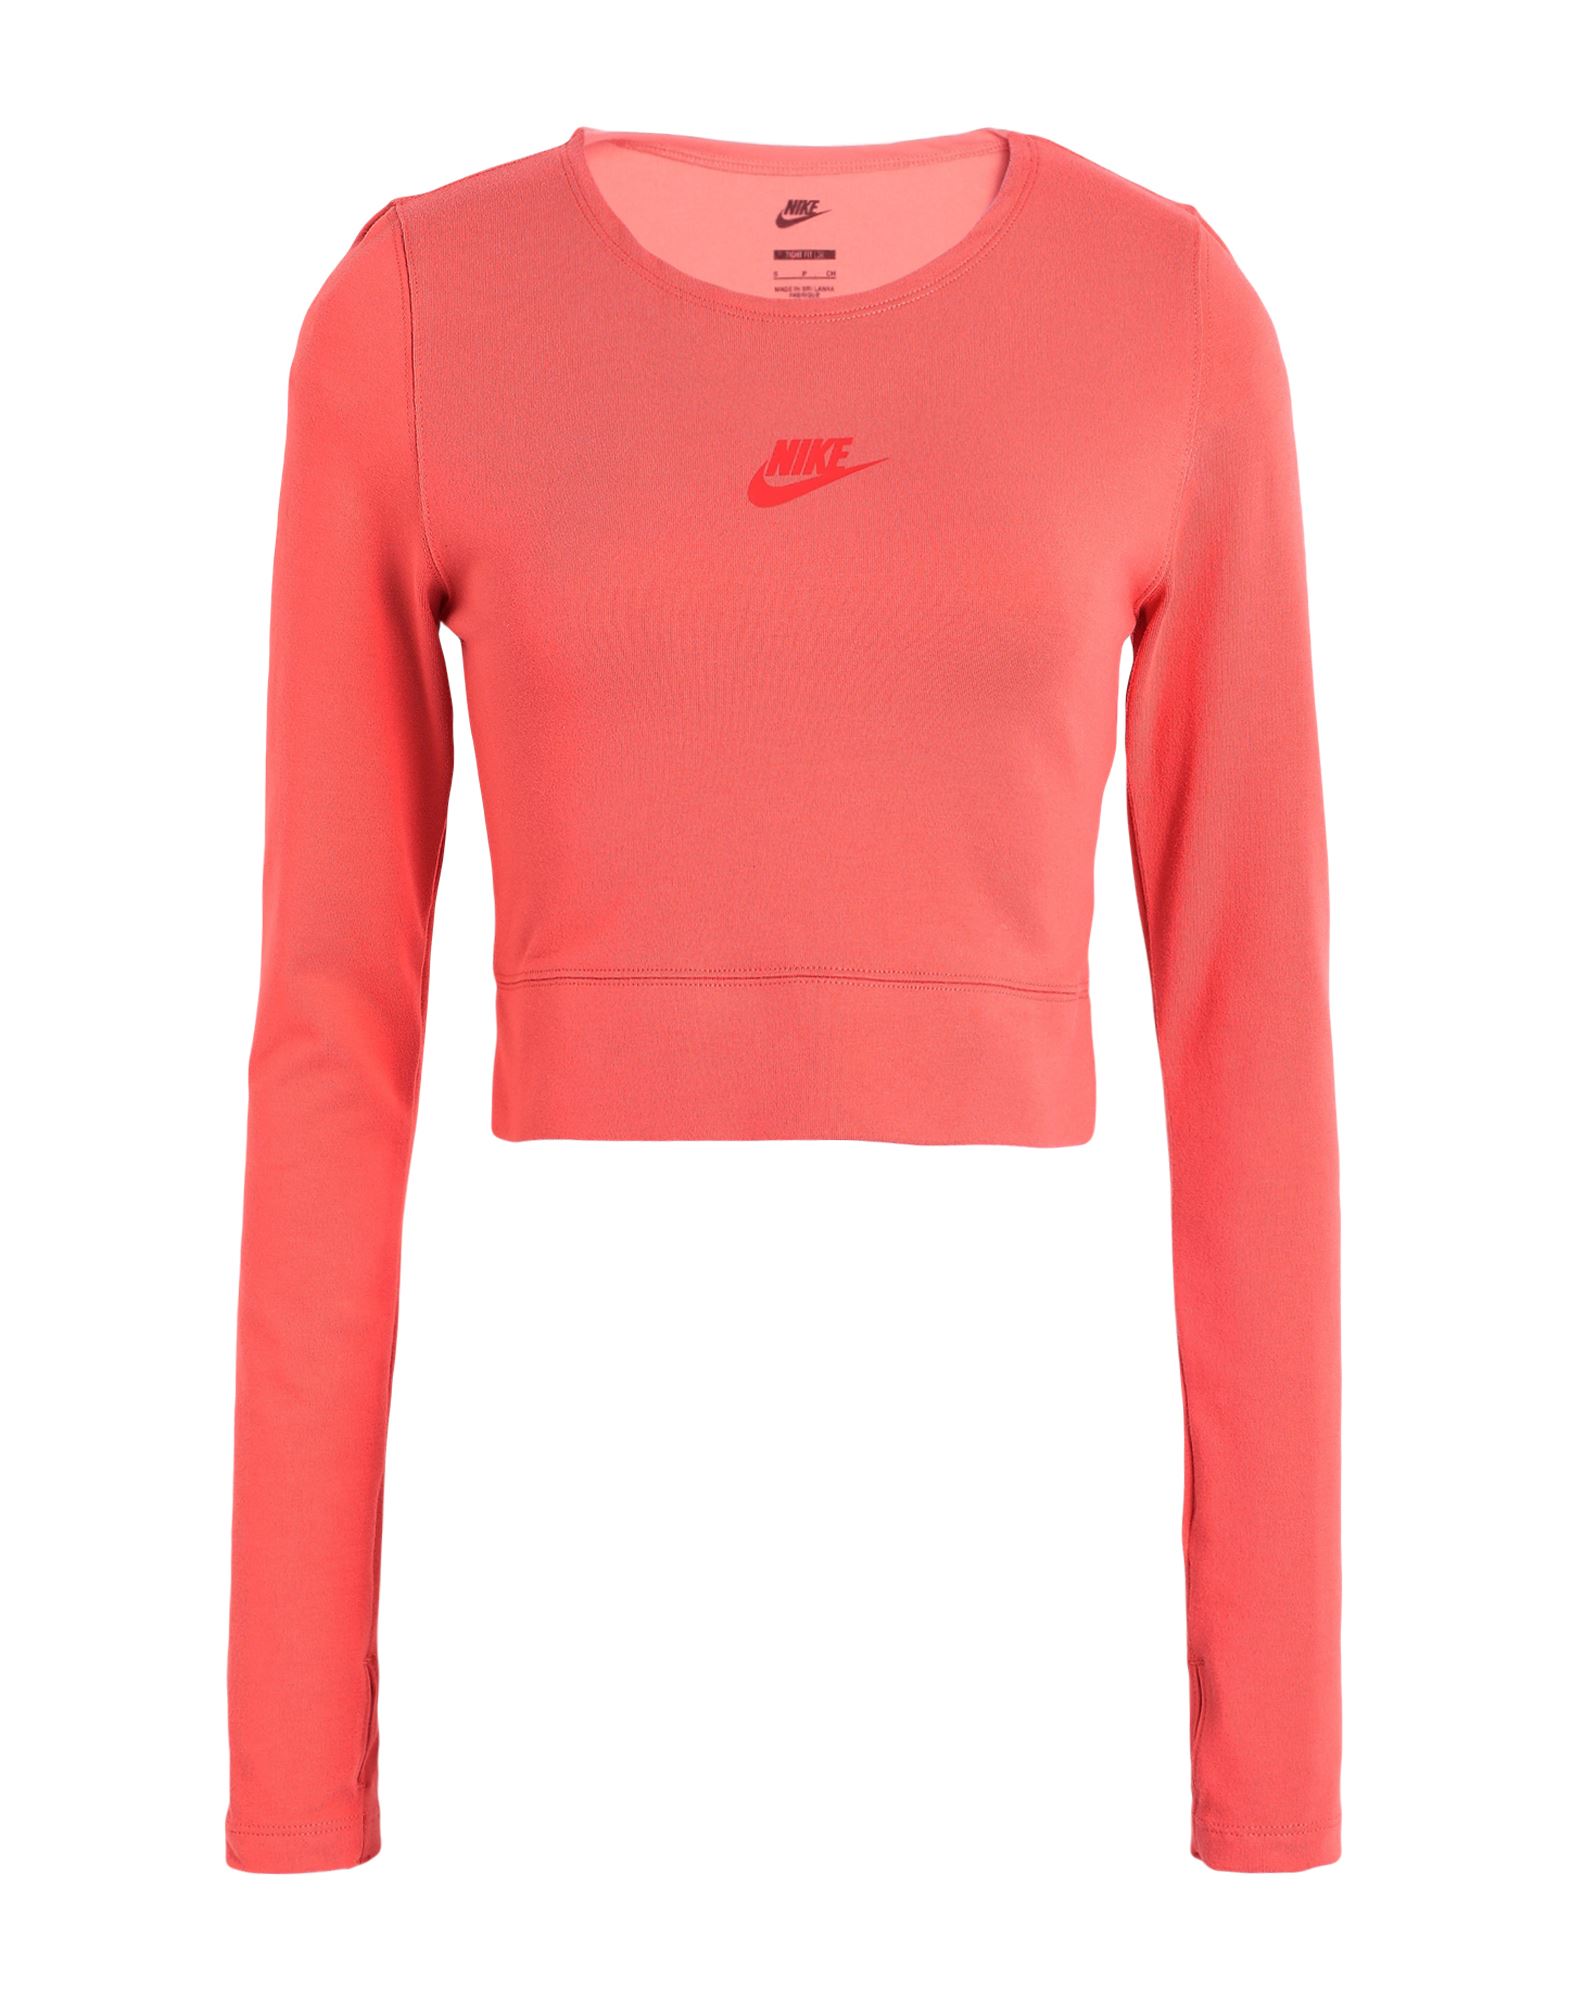 Nike T-shirts In Pink